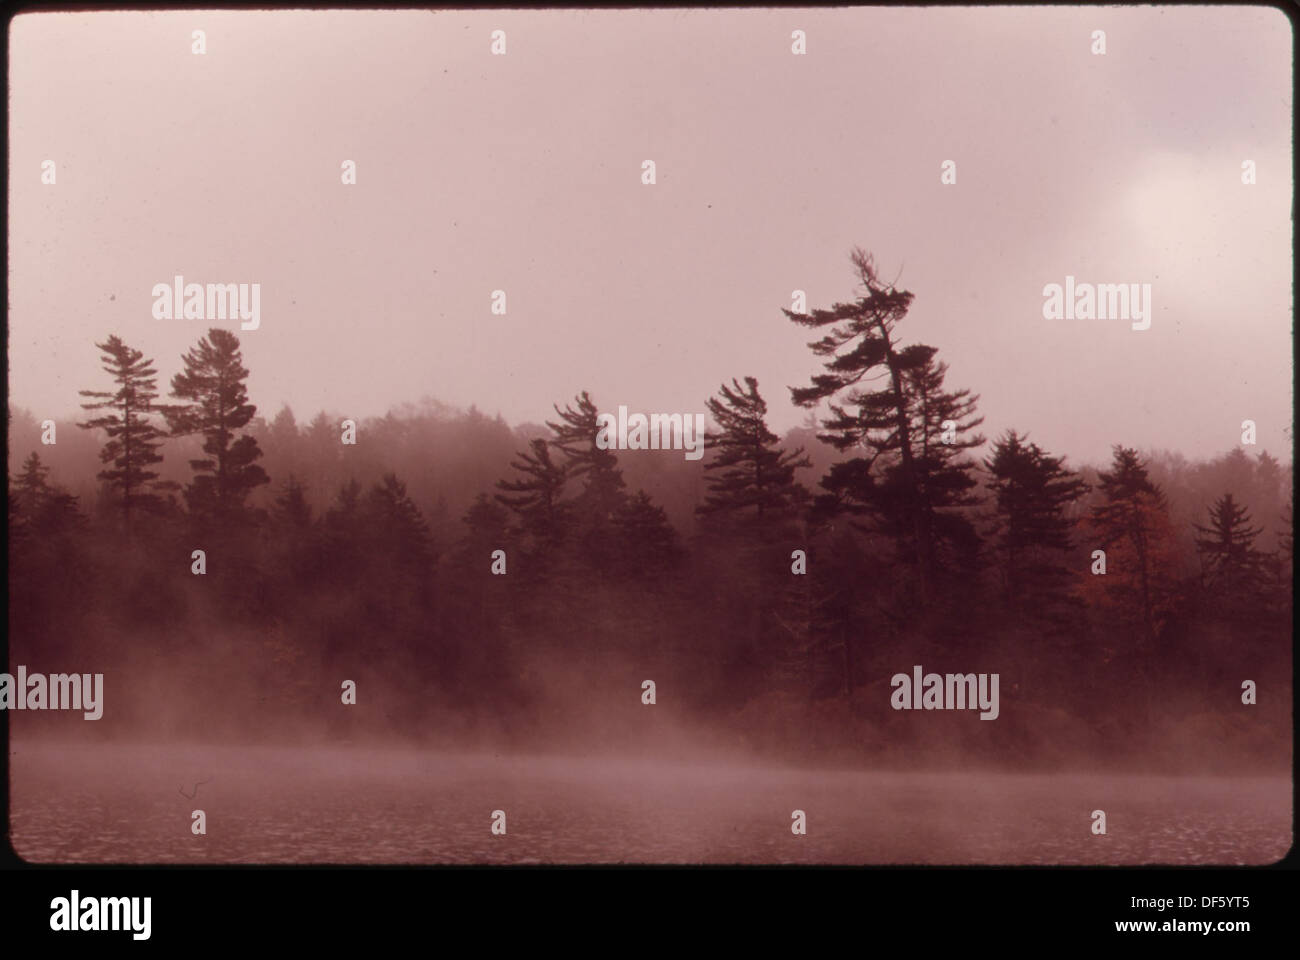 MISTY MORNING ON TWITCHELL LAKE SHOWING VIRGIN WHITE PINES IN THE ADIRONDACK FOREST PRESERVE 554754 Landscape Stock Photo